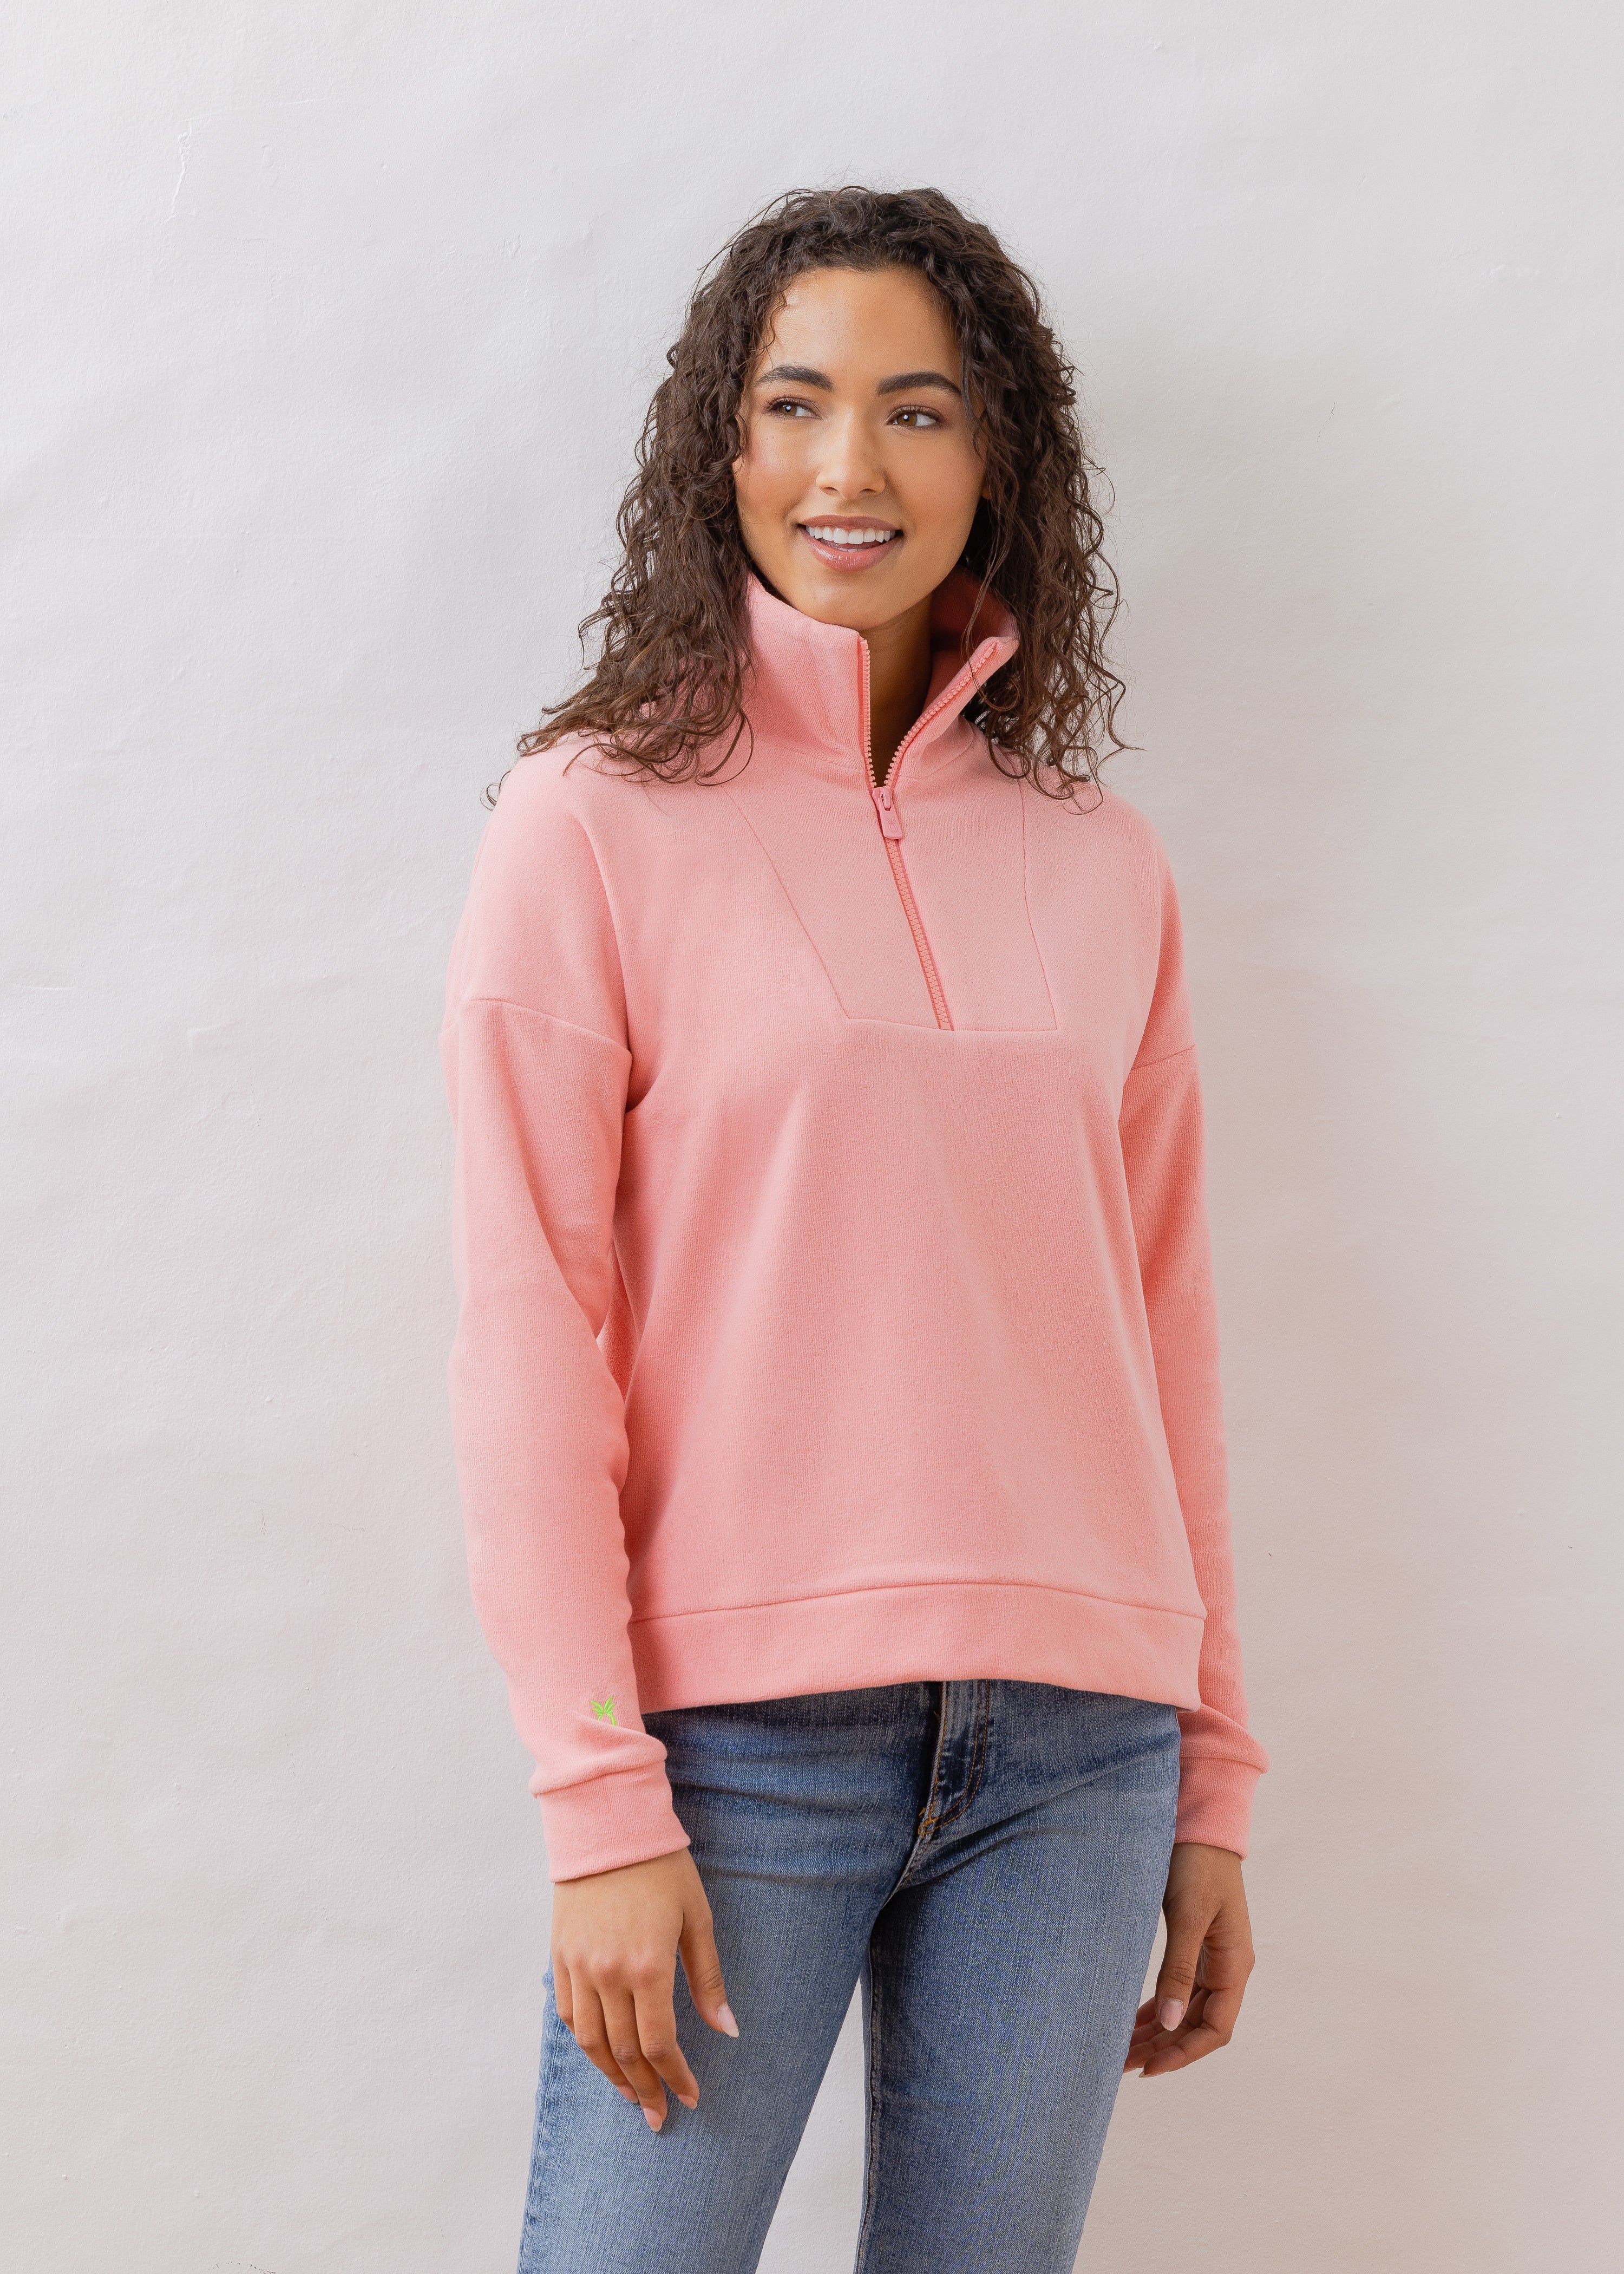 Putnam Pullover in Terry Fleece (Island Coral) | Dudley Stephens